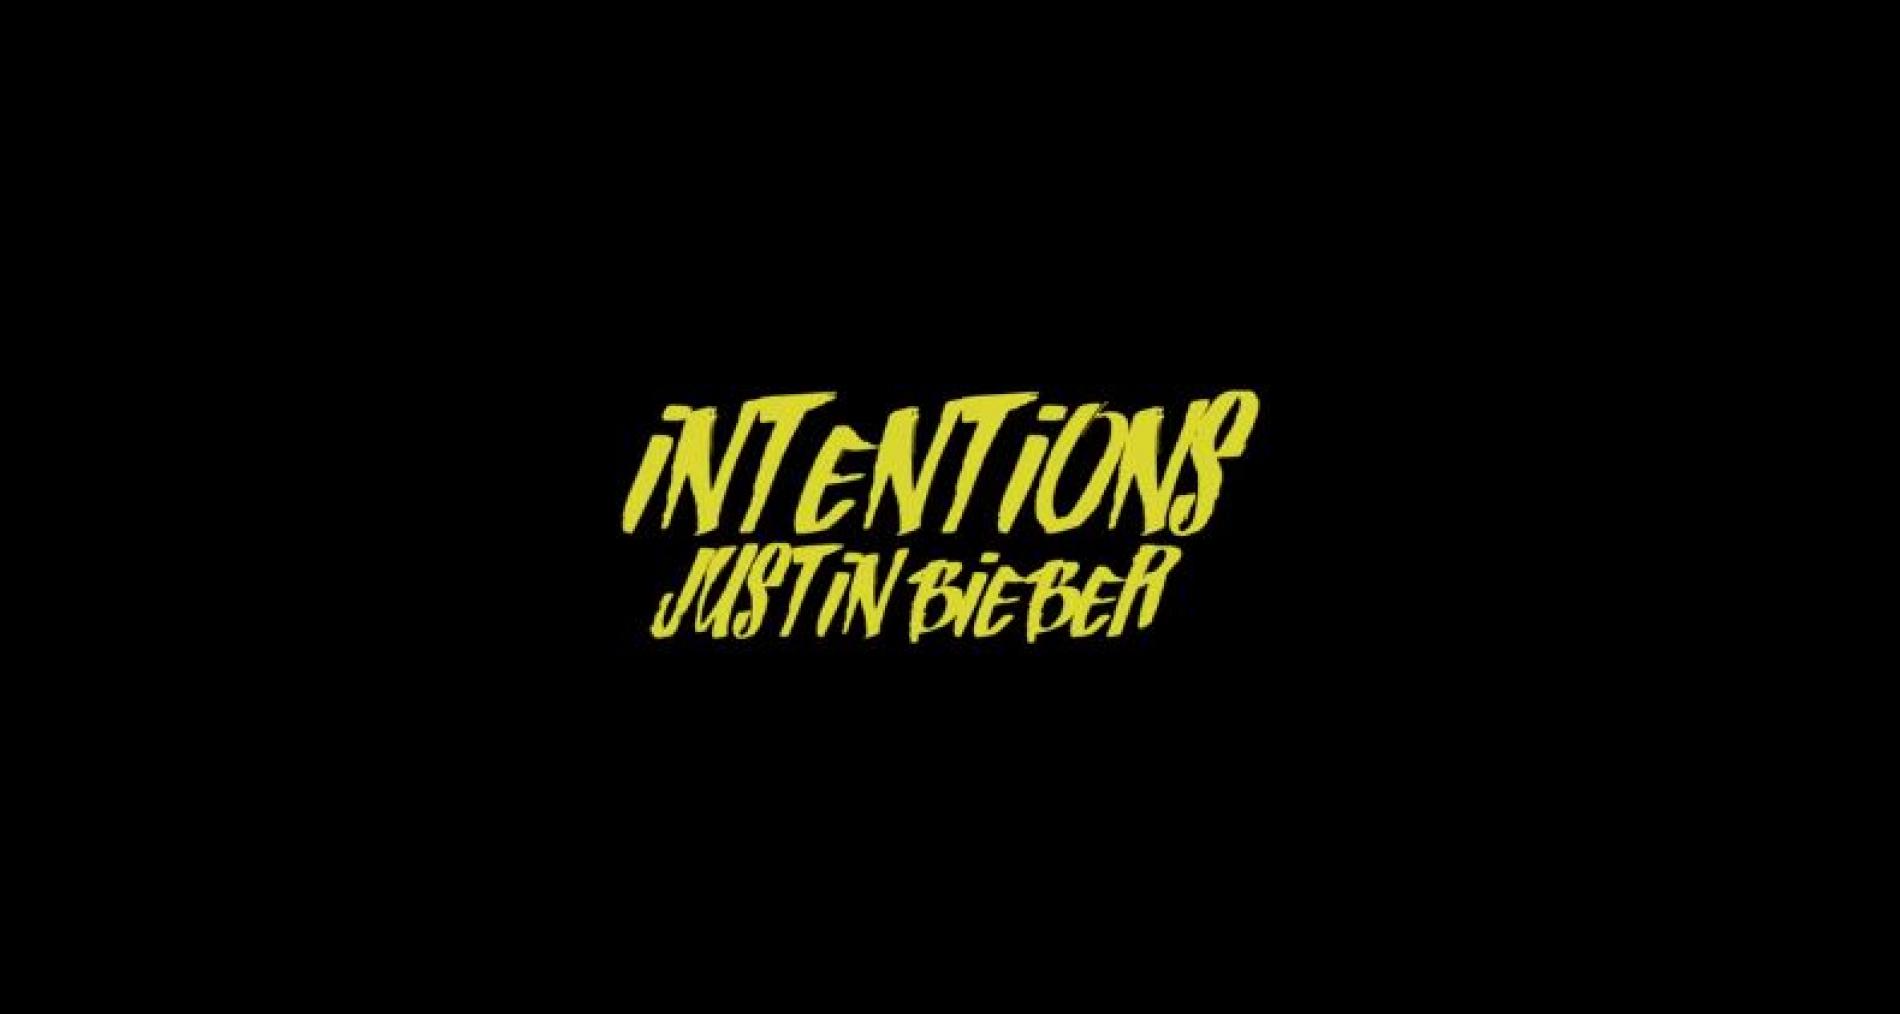 Minesh Dissanayake : Justin Bieber – Intentions (Cover)